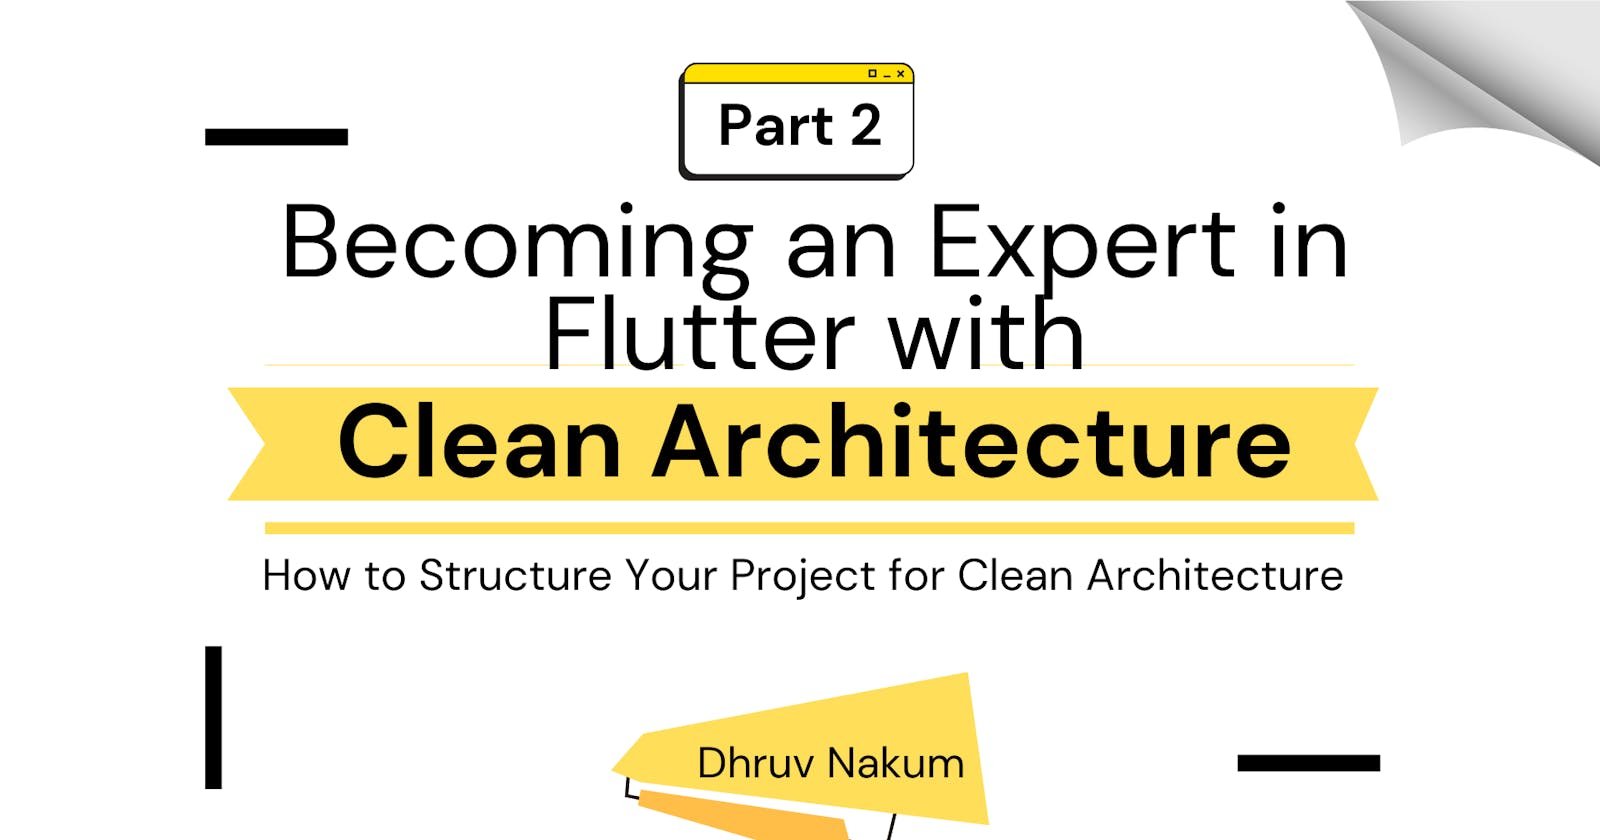 Becoming an Expert in Flutter with Clean Architecture: Part 2